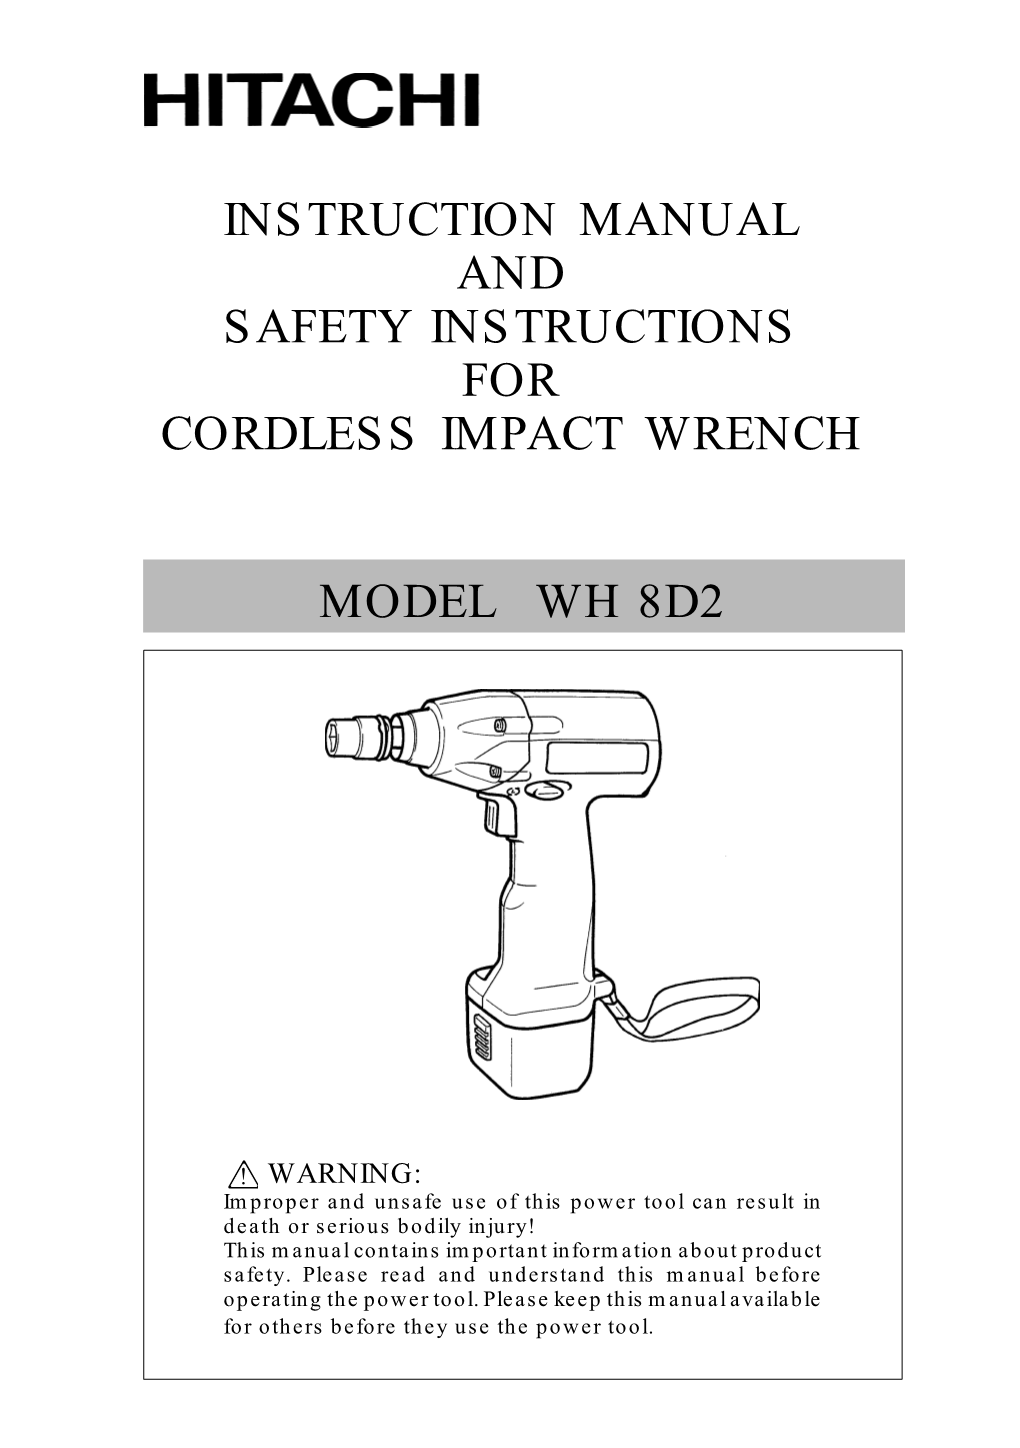 Instruction Manual and Safety Instructions for Cordless Impact Wrench